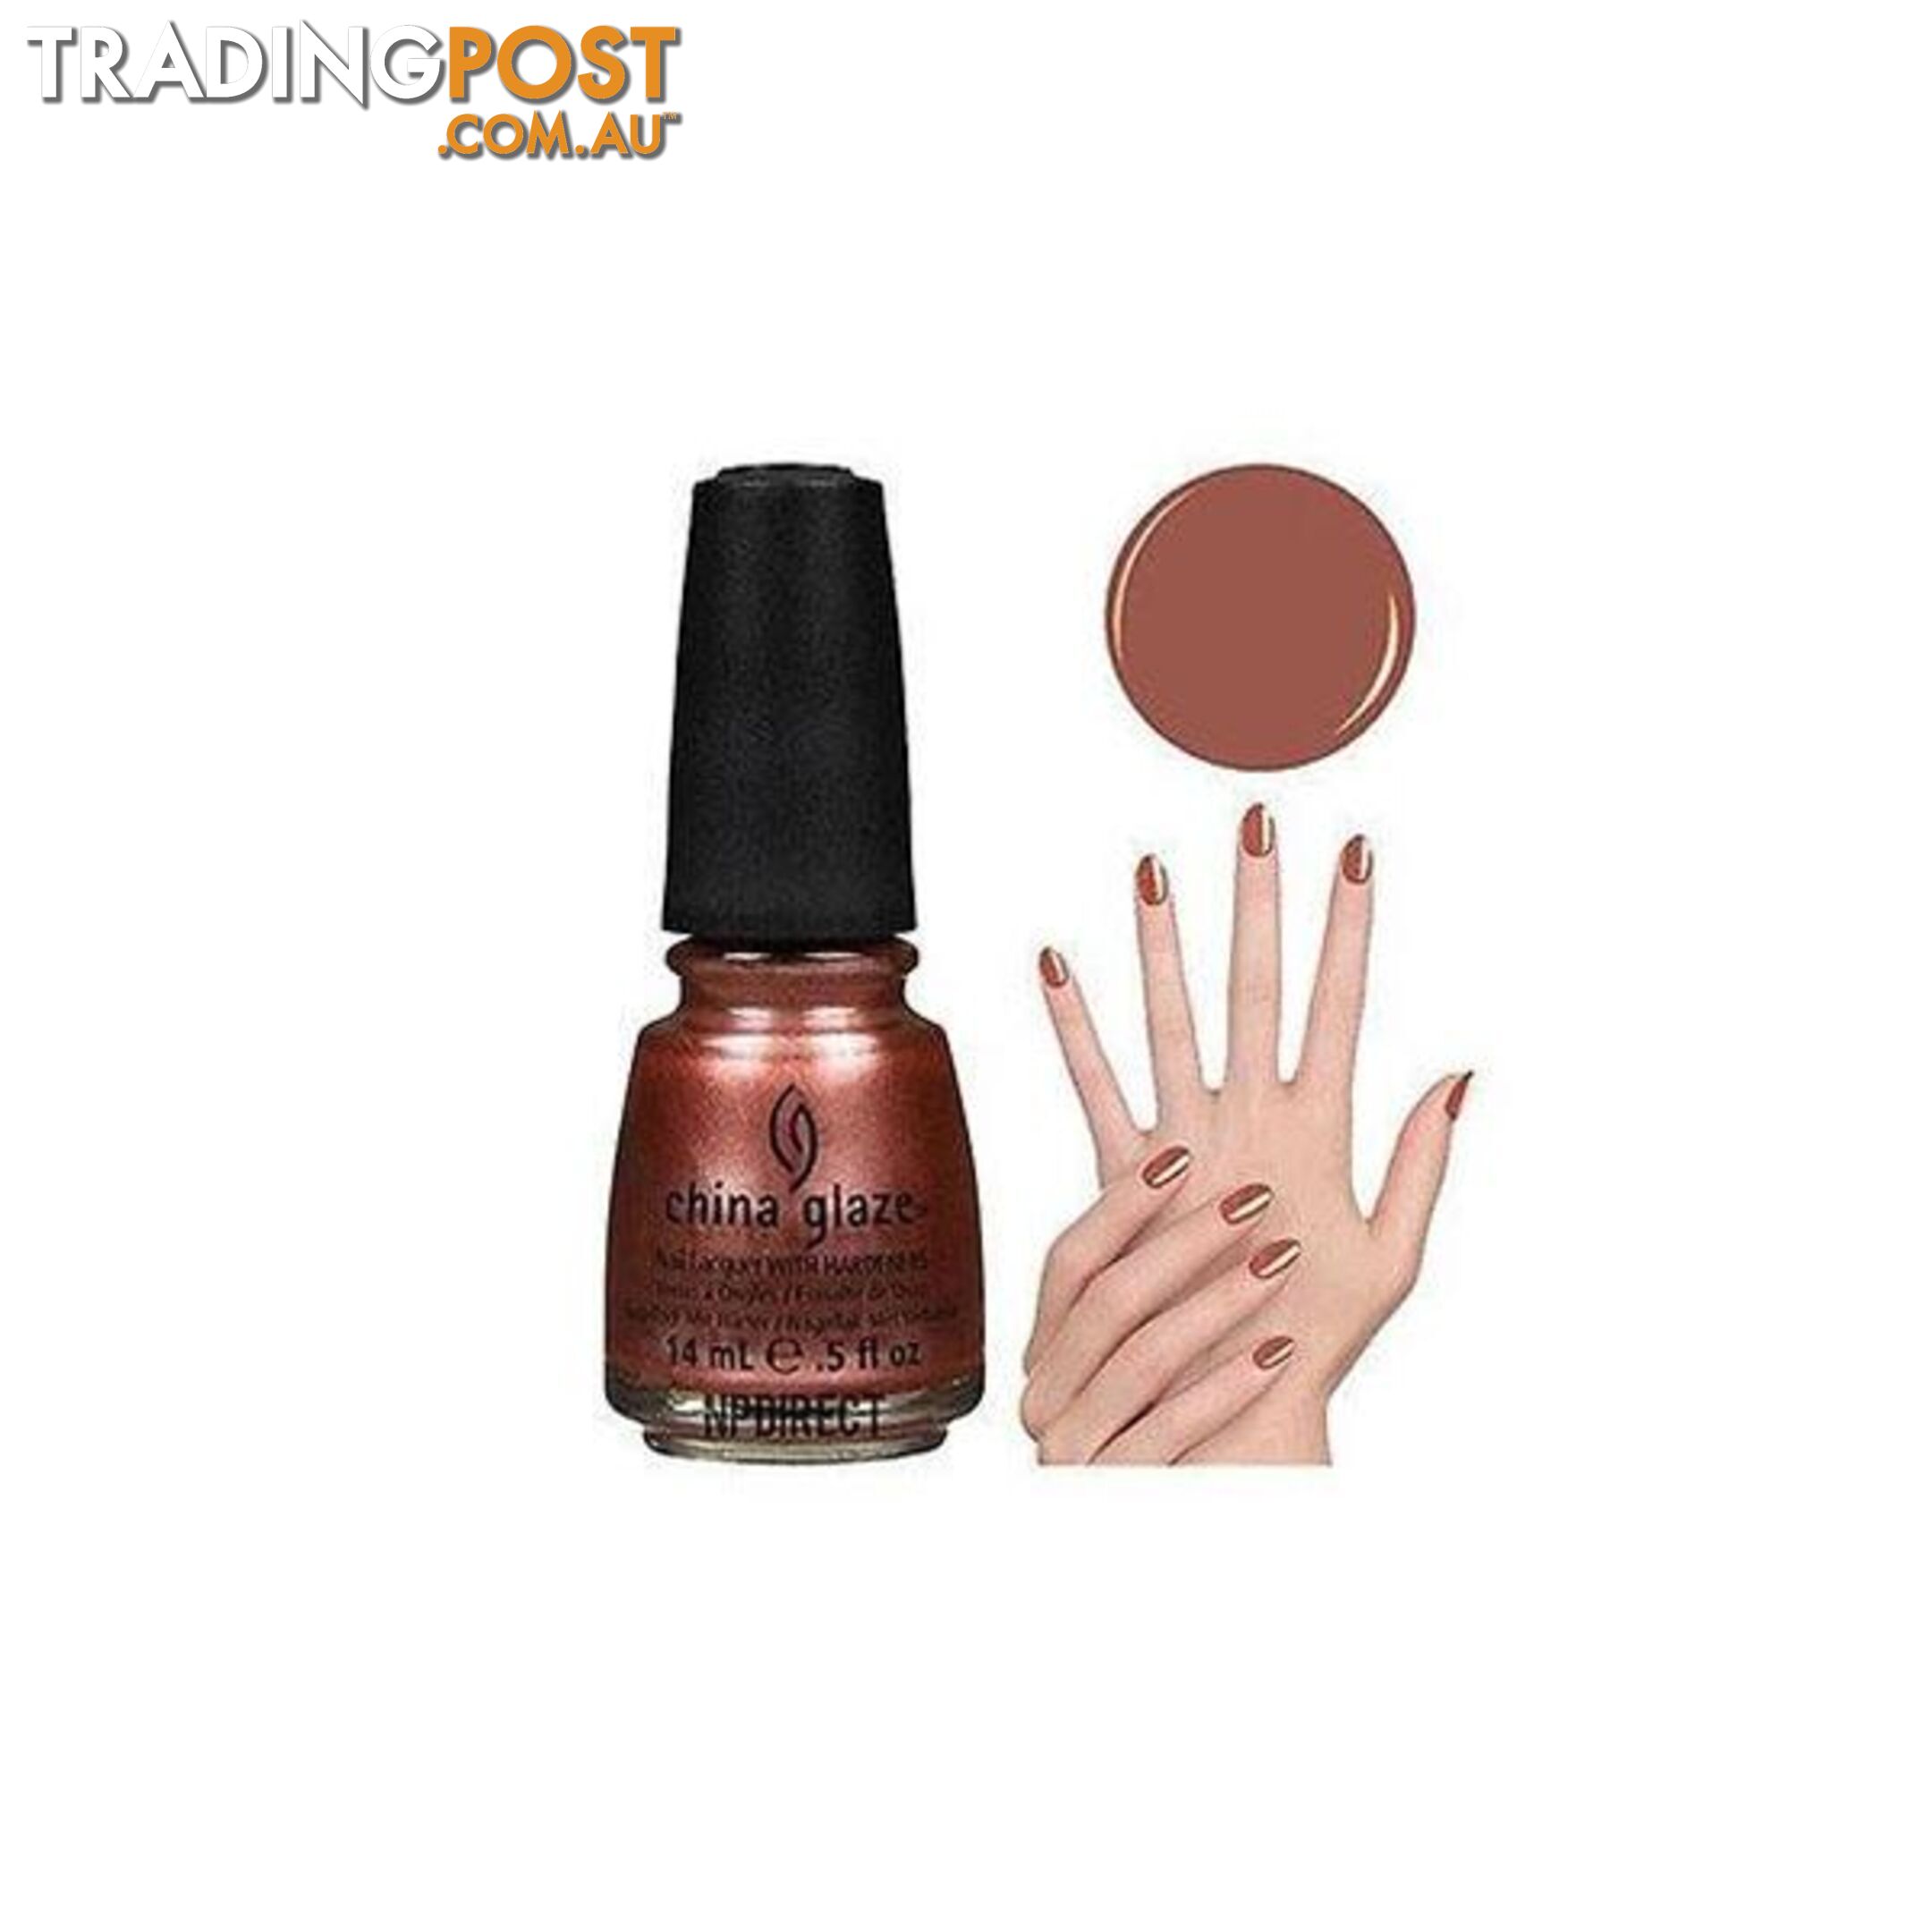 China Glaze Nail Lacquer - Unbranded - 4326500379771